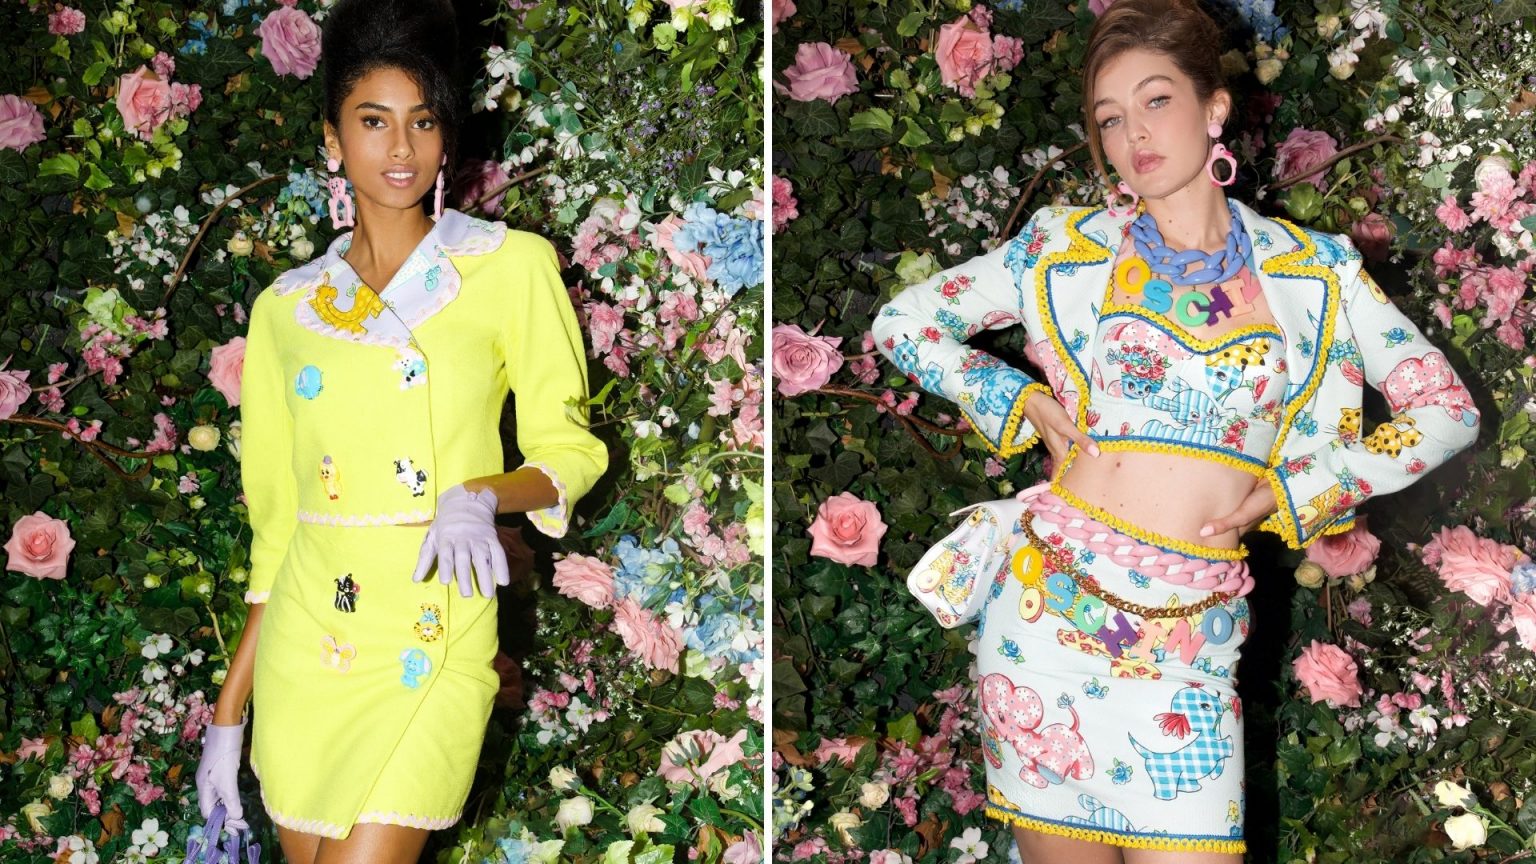 Gigi Hadid, Imaan Hammam And Other Models Dominate The Runway At New ...